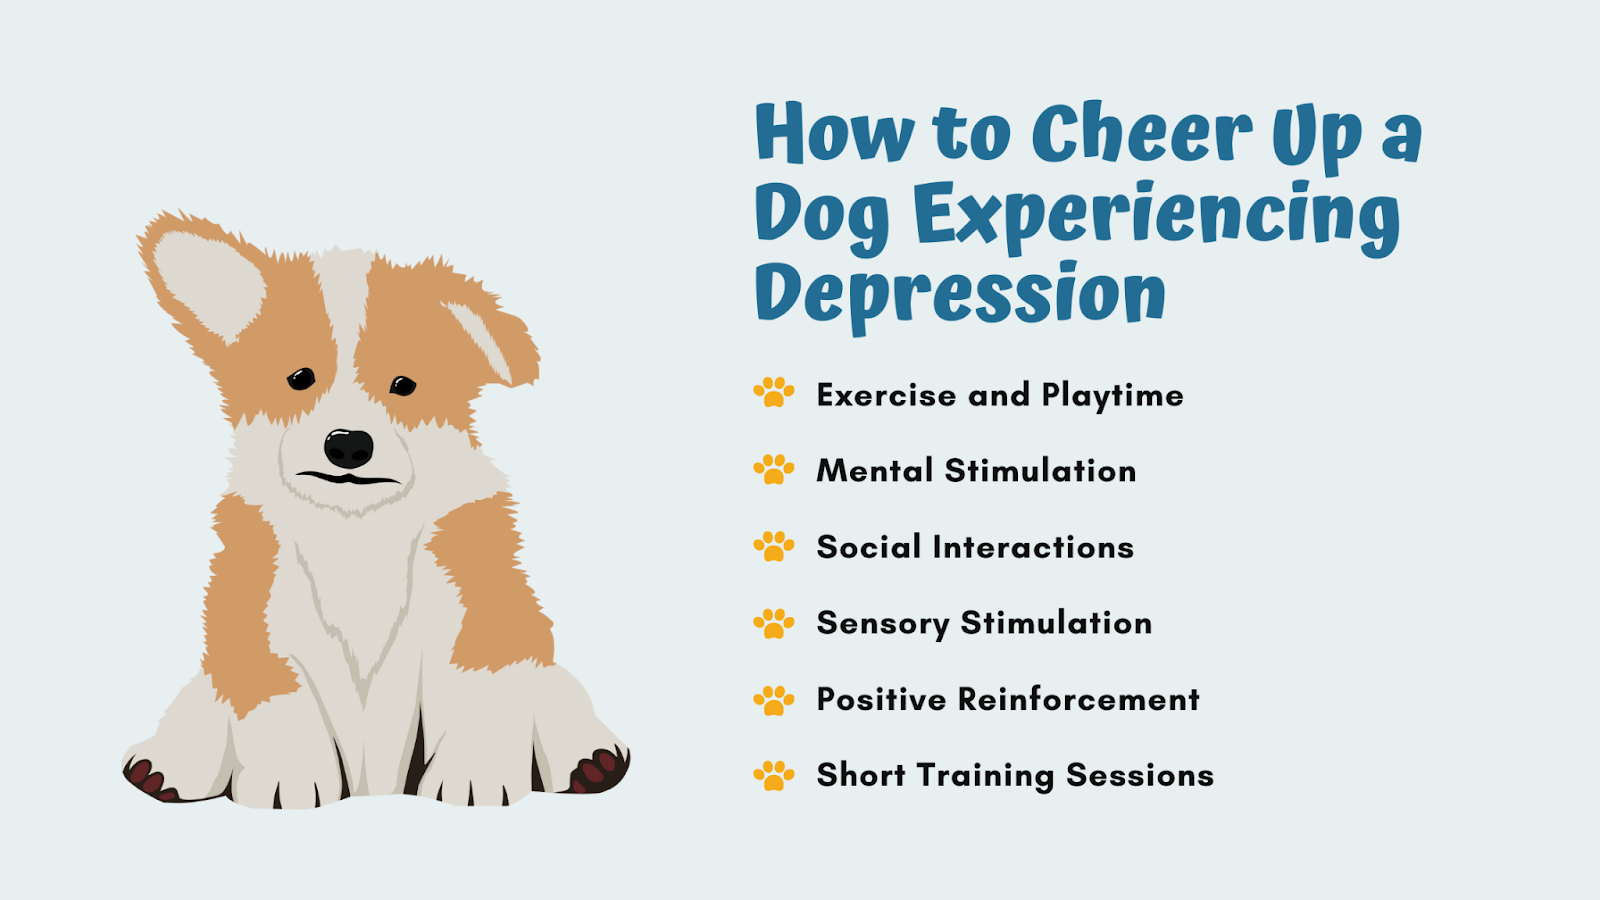 Cheer up a dog experiencing depression